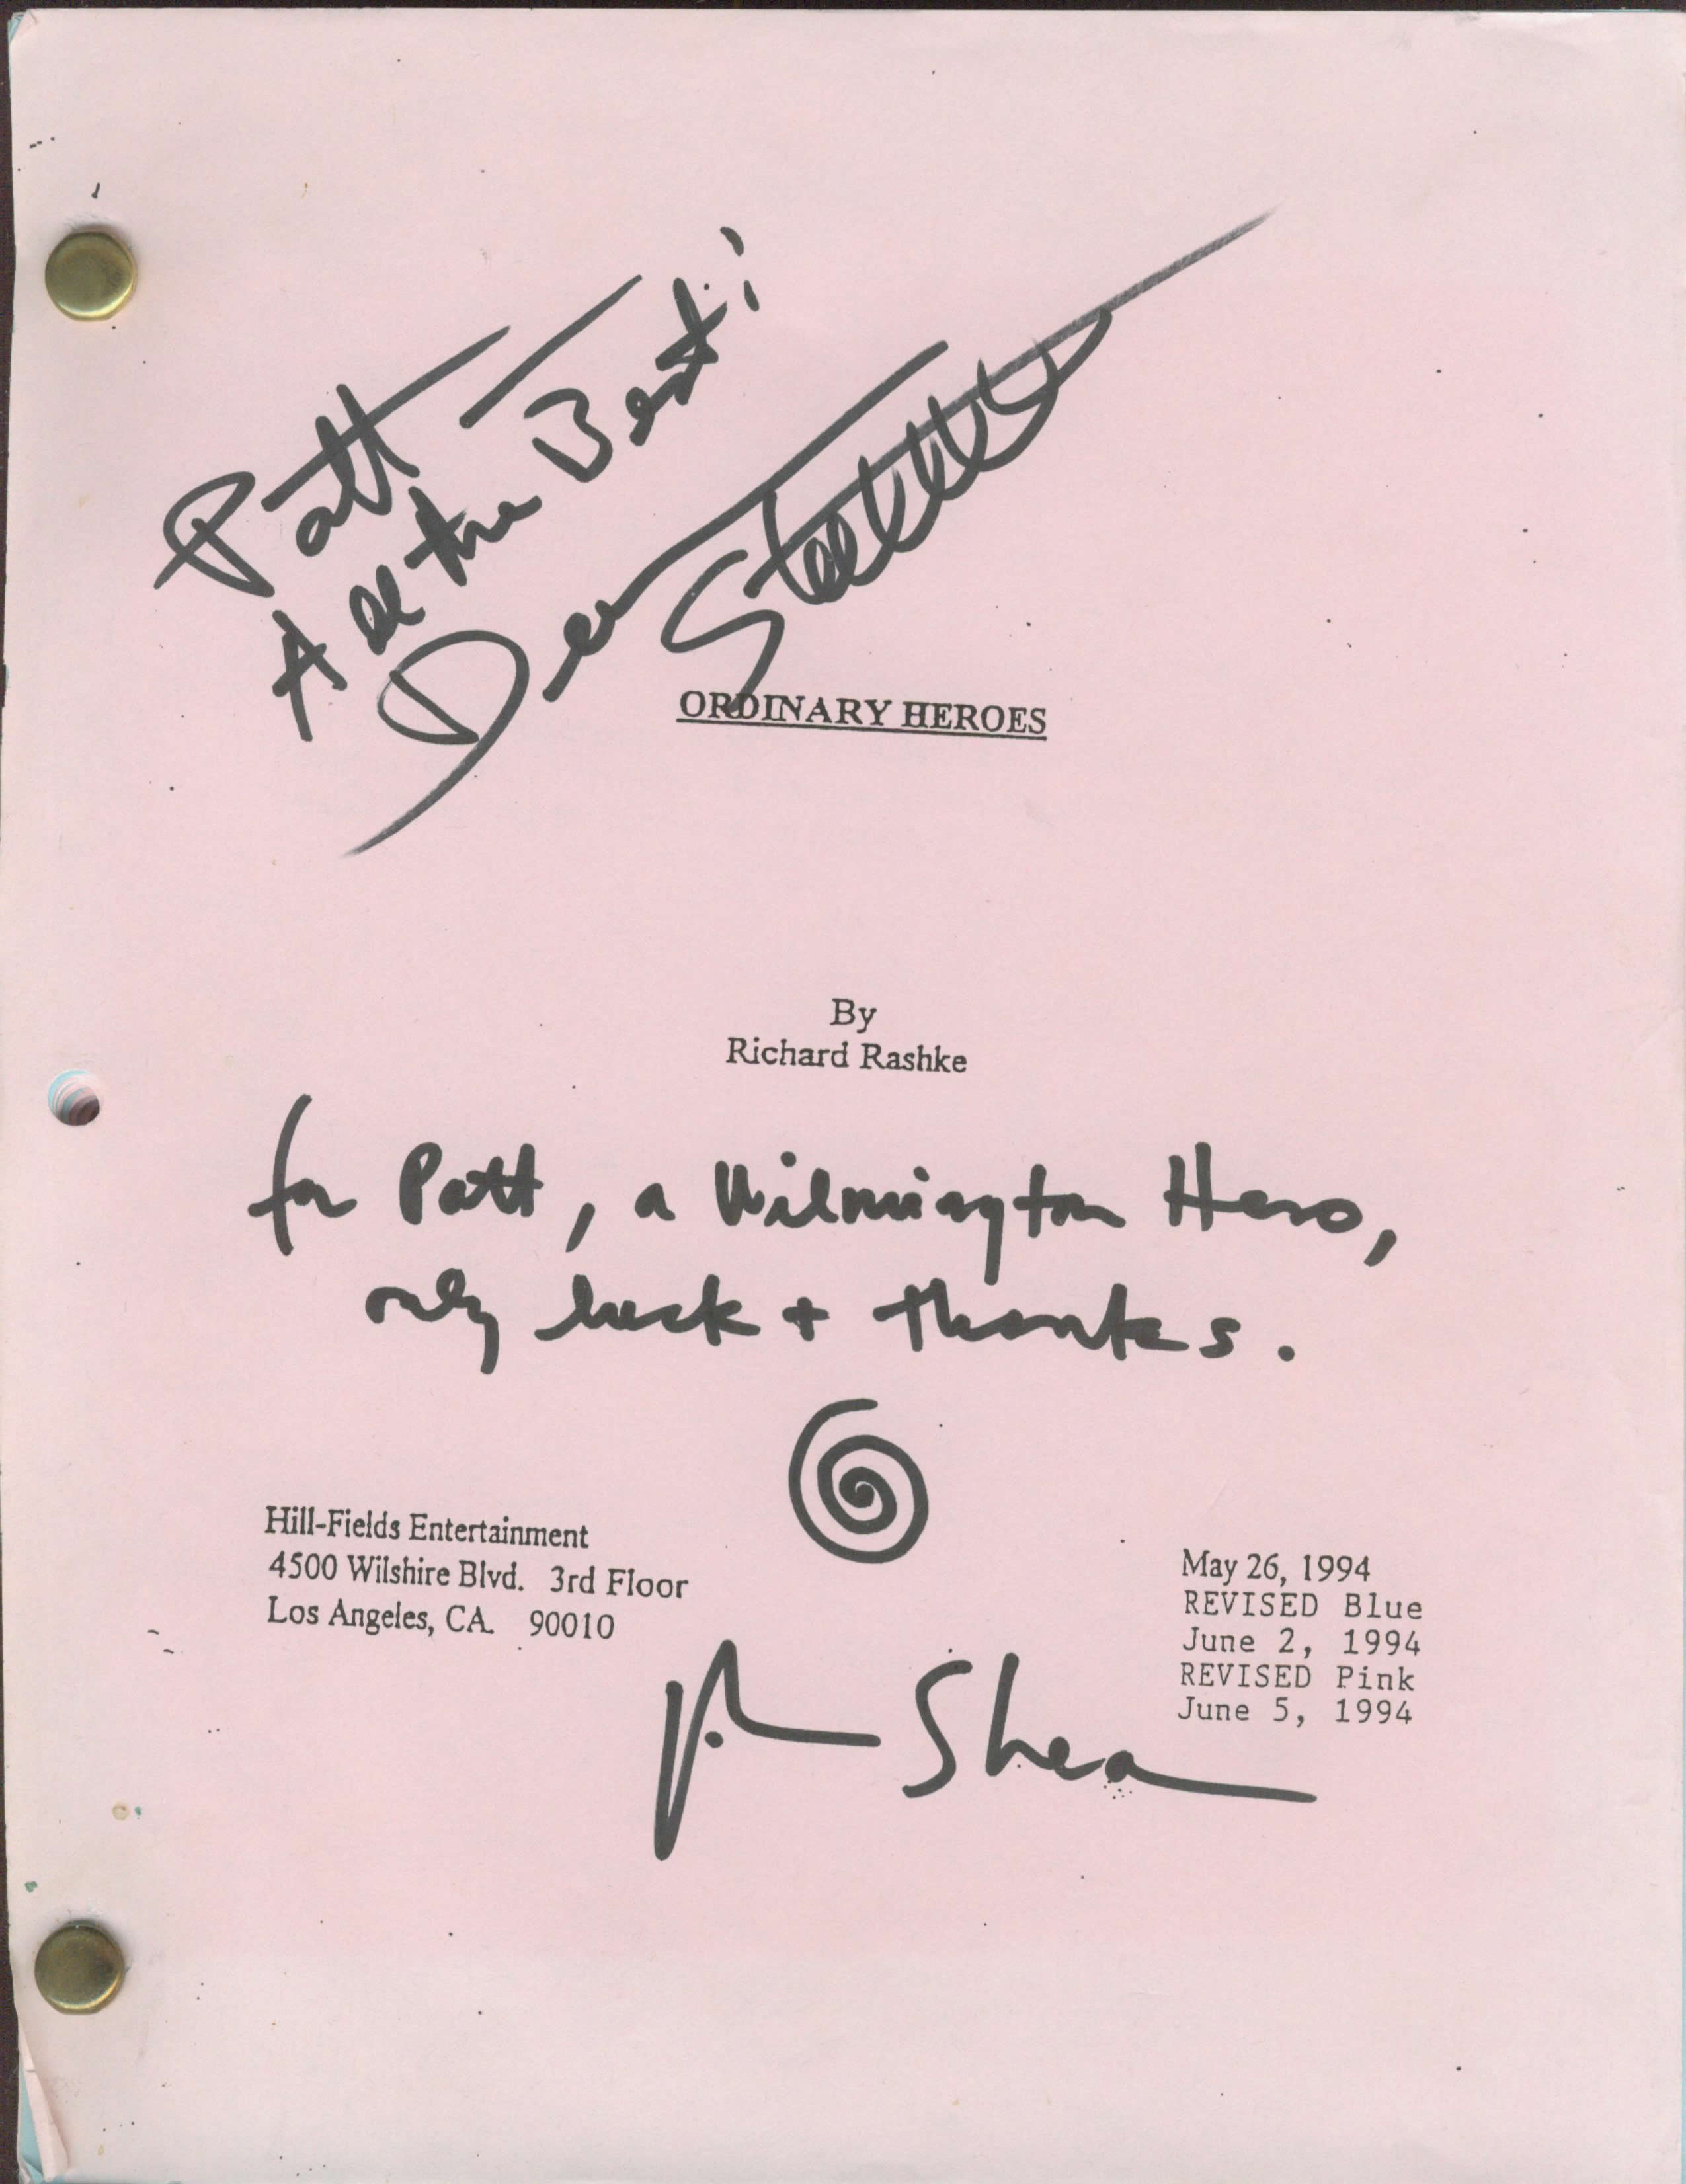 ORDINARY HEROES;JUSTICE IN A SMALL TOWN: Patt Noday: signed script cover from the NBC Movie of the Week co-starring Dean Stockwell, John Shea, Kate Jackson, Patt Noday, and more!